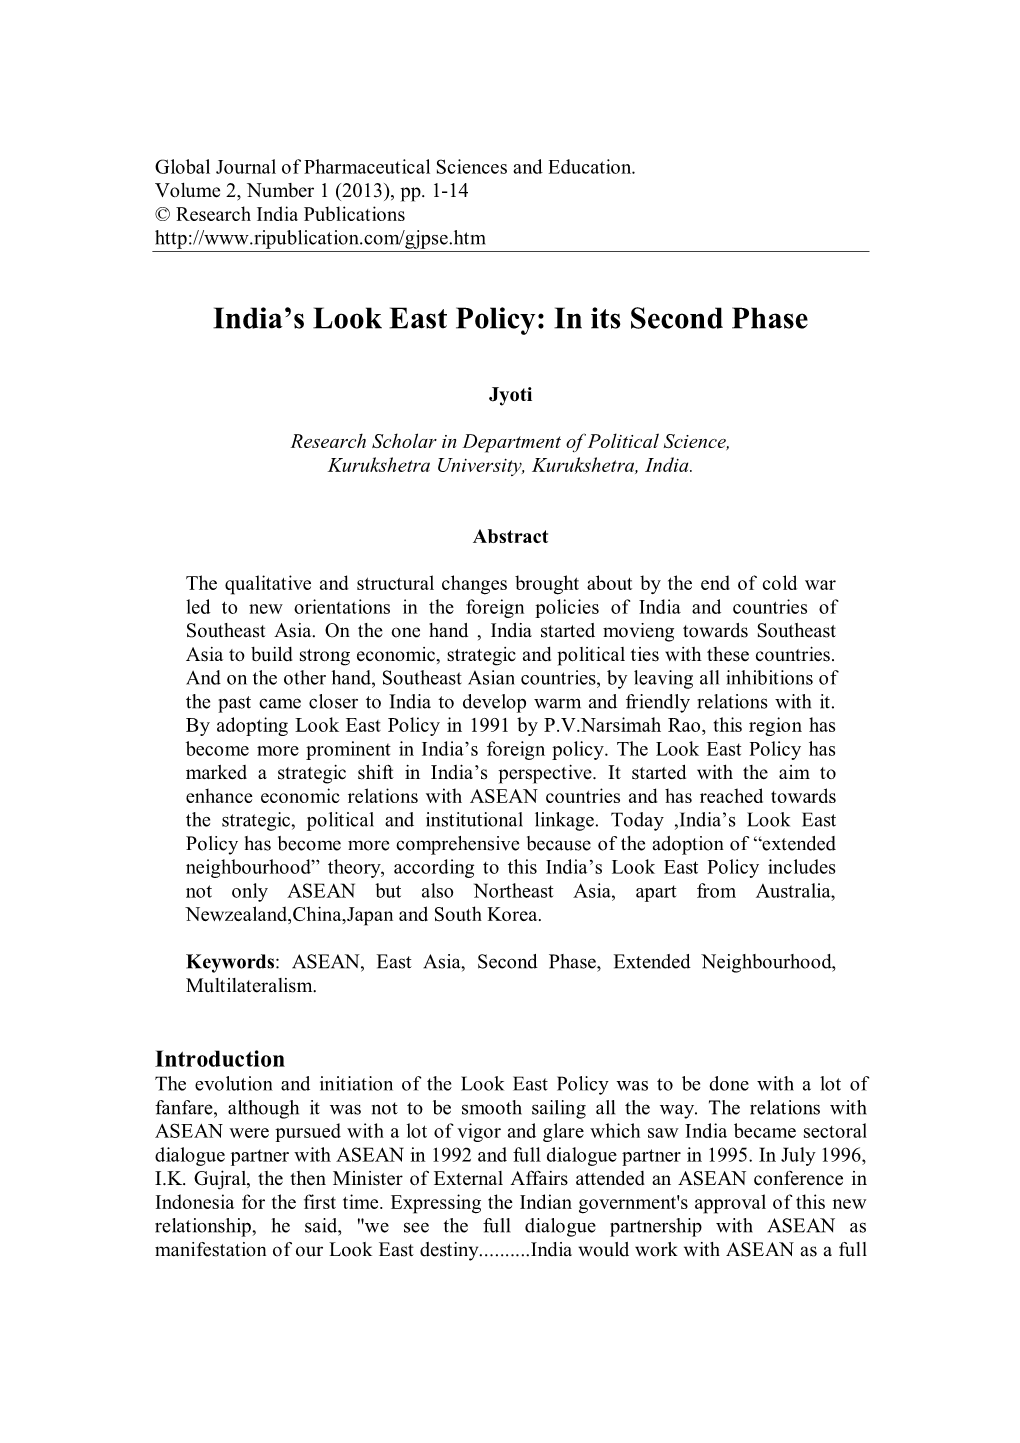 India's Look East Policy: in Its Second Phase